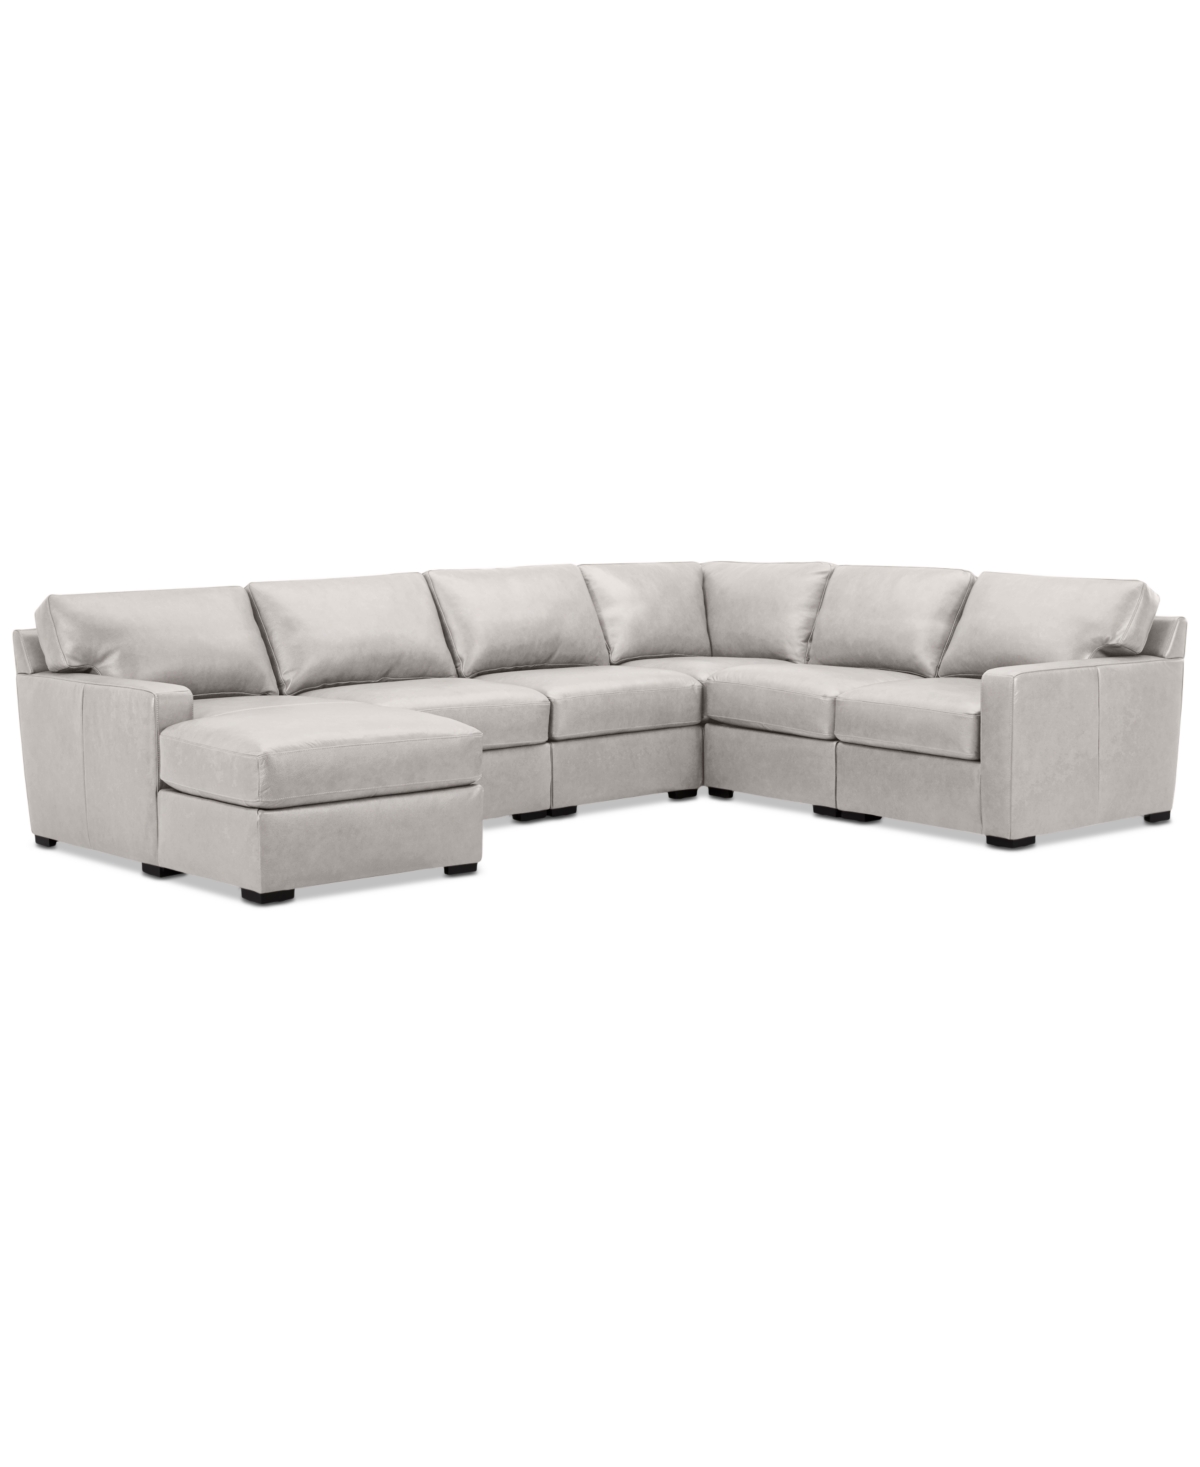 Macy's Radley 129" 6-pc. Leather Square Corner Modular Chaise Sectional, Created For  In Ash